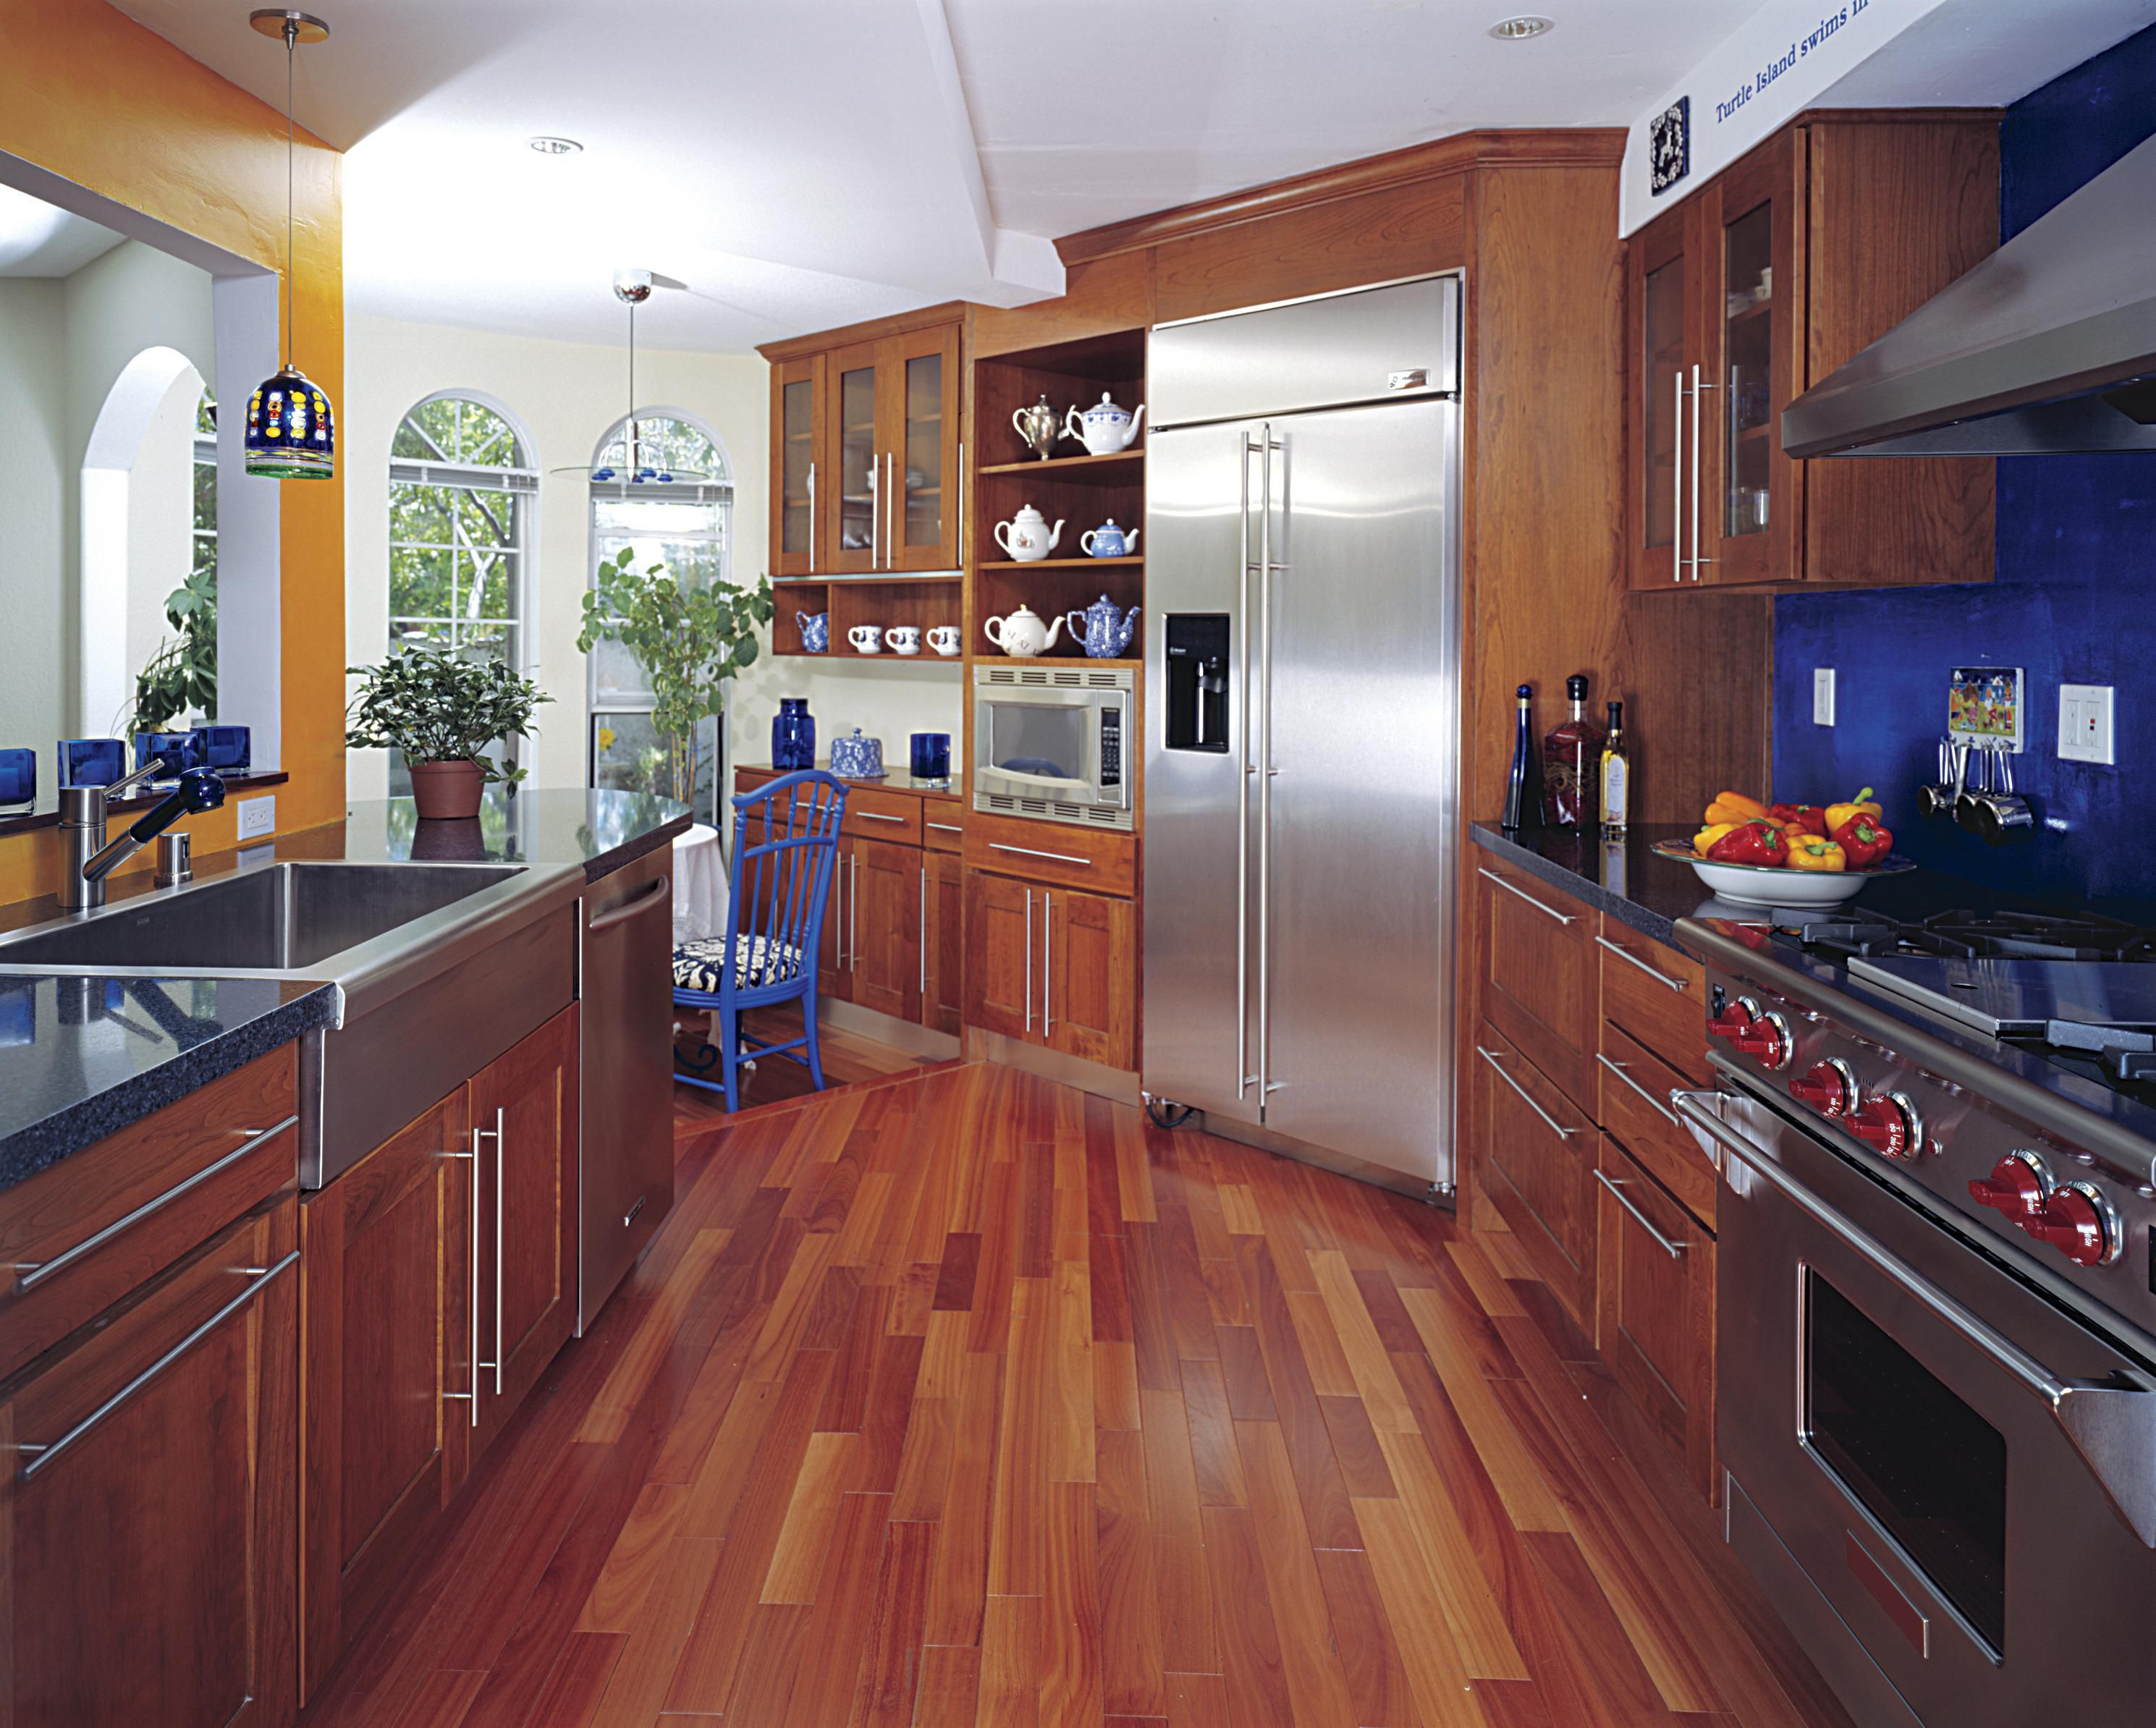 mahogany hardwood flooring prices of hardwood floor in a kitchen is this allowed intended for 186828472 56a49f3a5f9b58b7d0d7e142